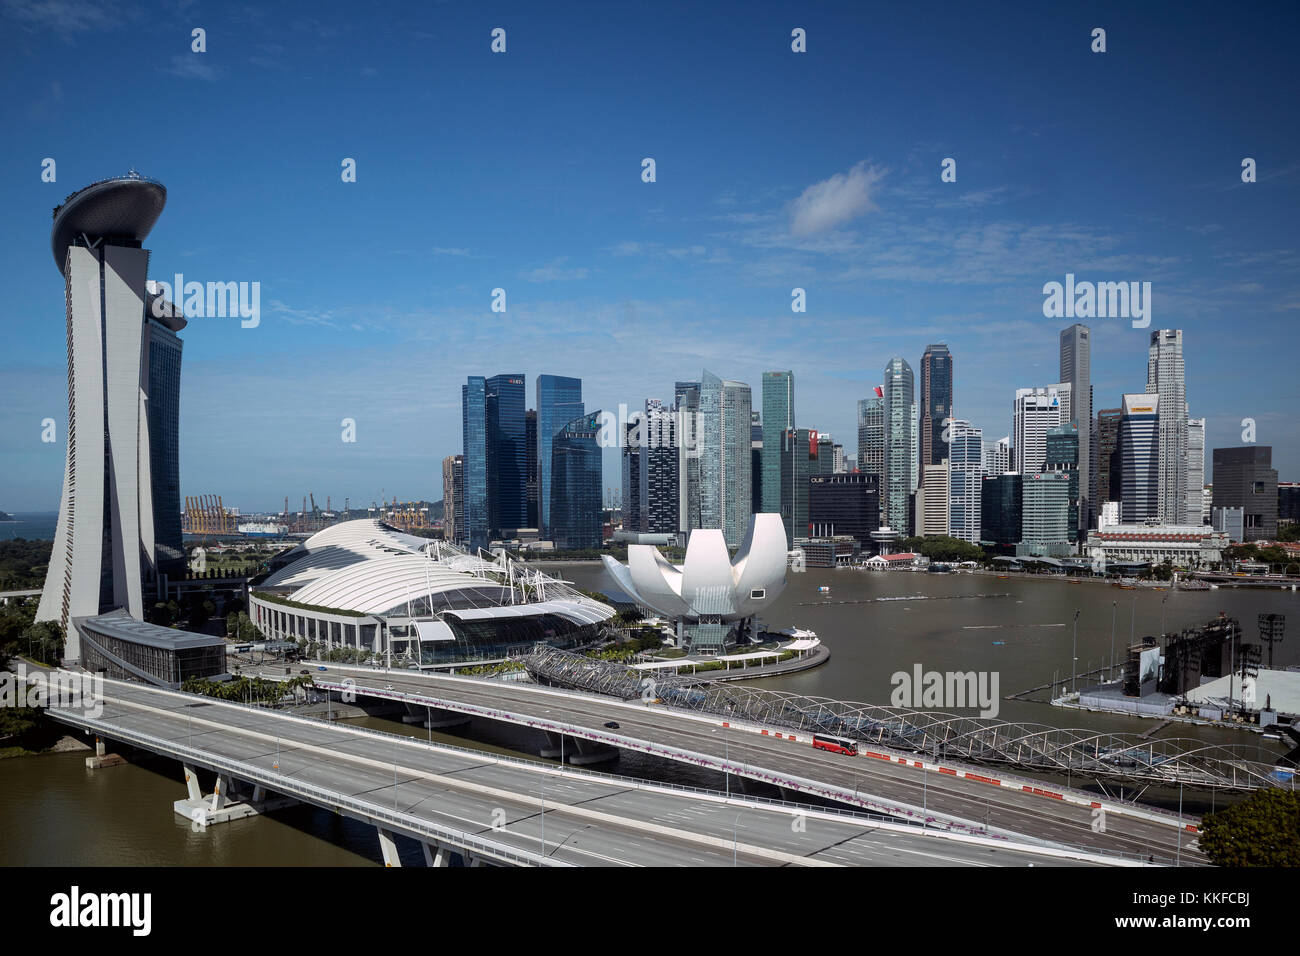 Daytime shot of  the Marina Bay area in Singapore, taken from the Singapore Flyer Wheel showing the skyline of Singapore Stock Photo